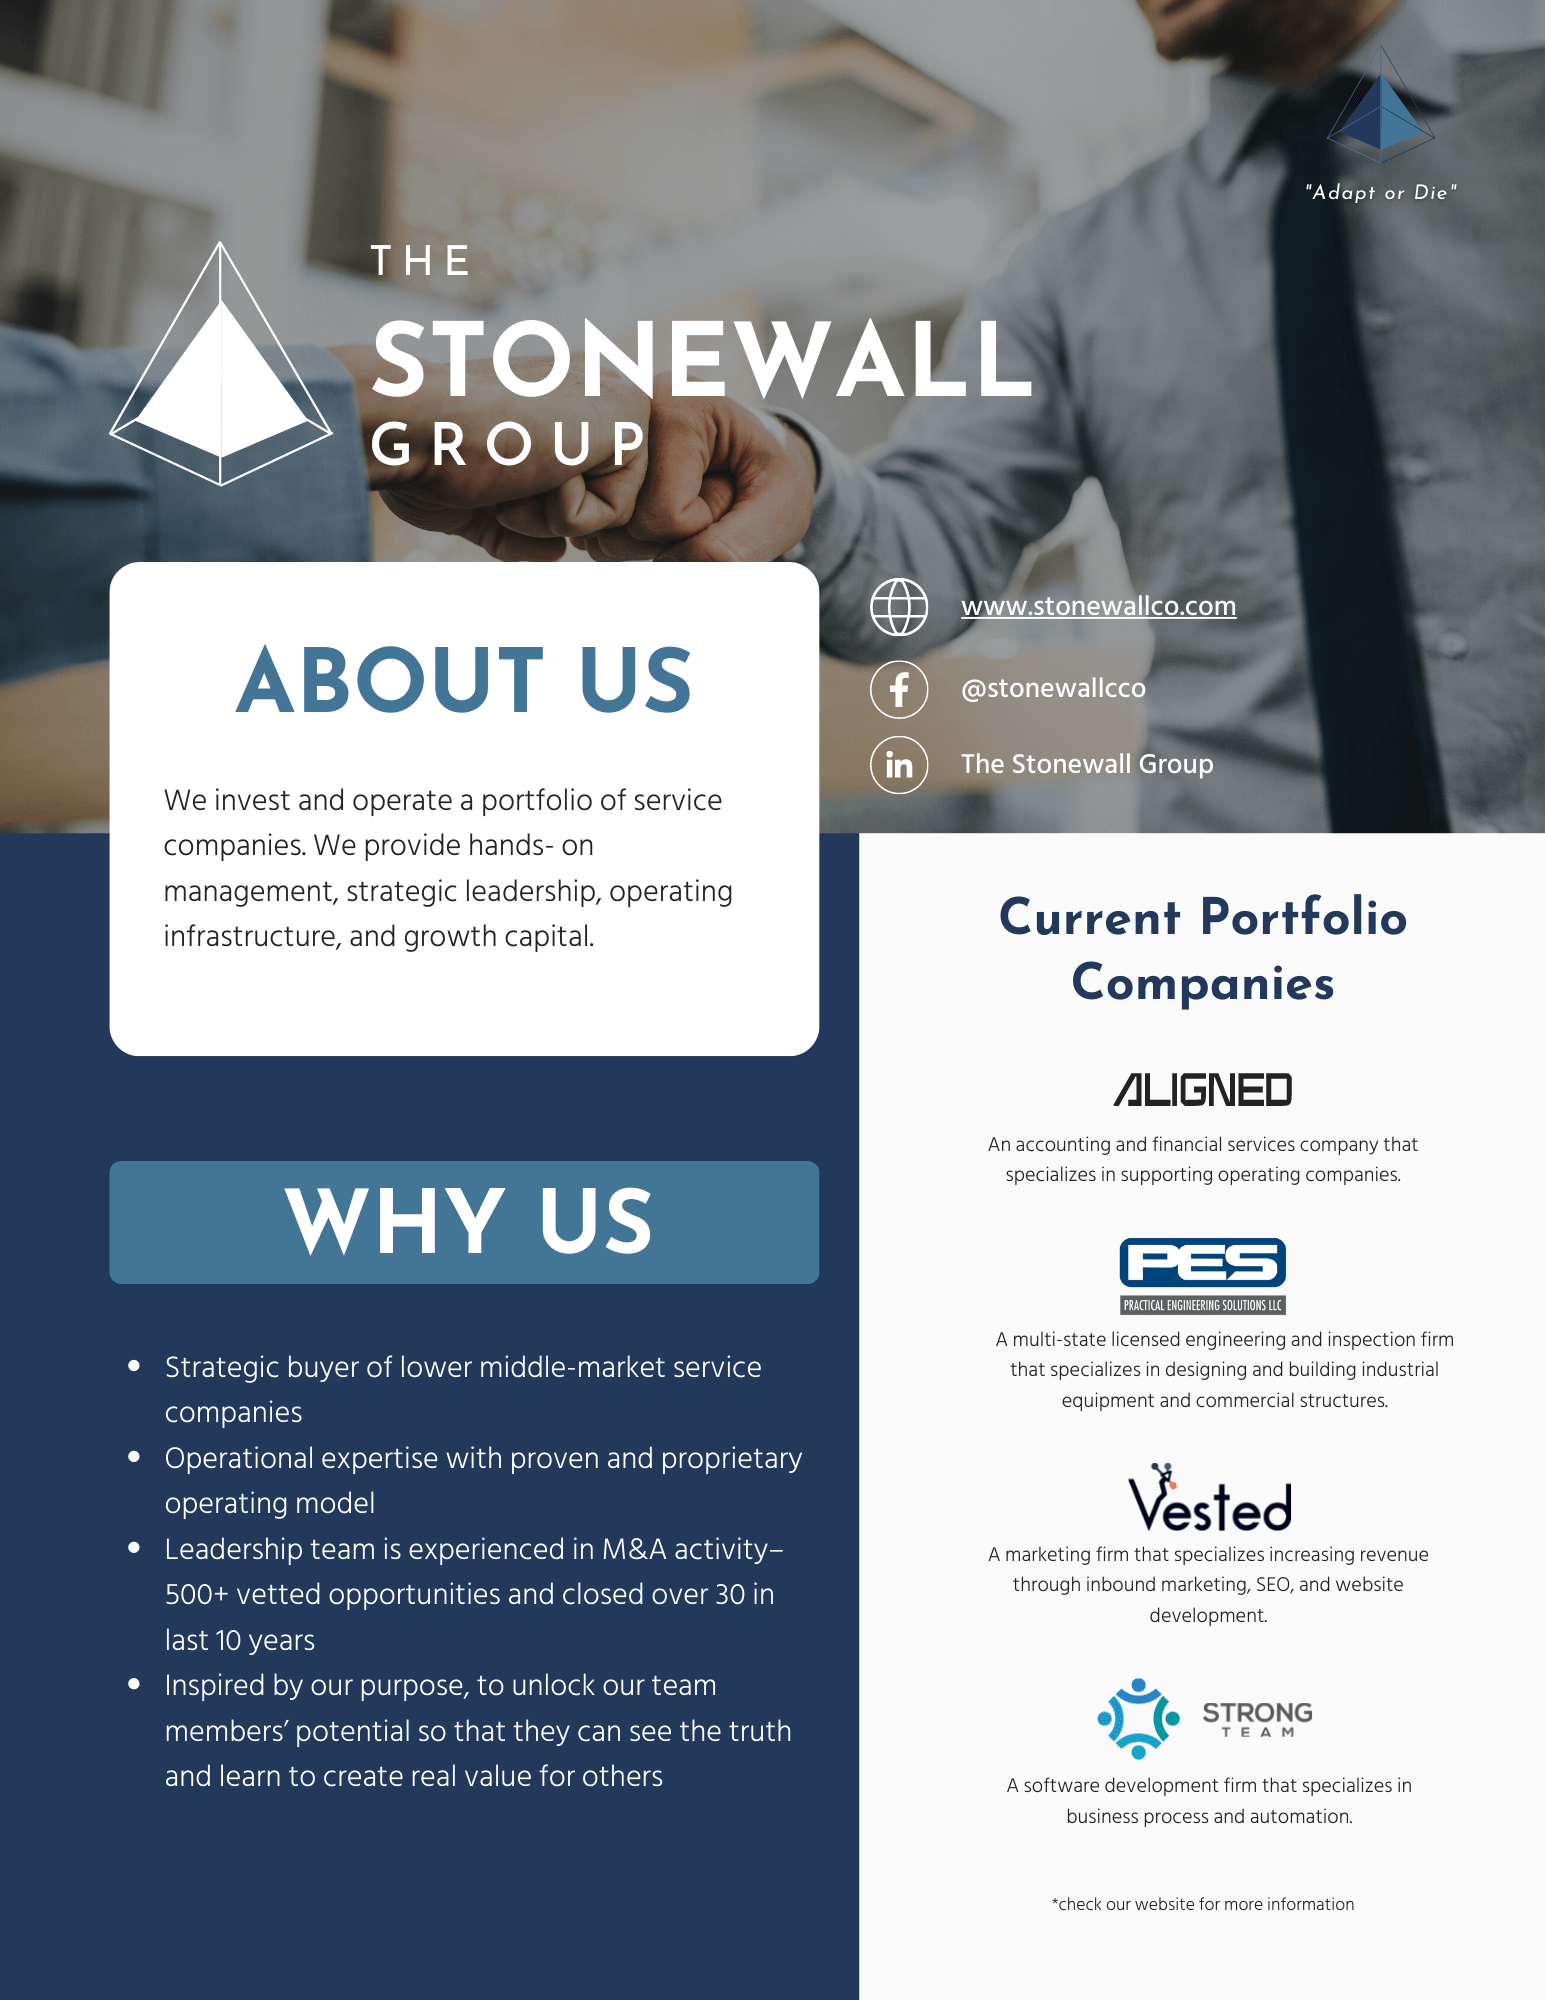 The Stonewall Group